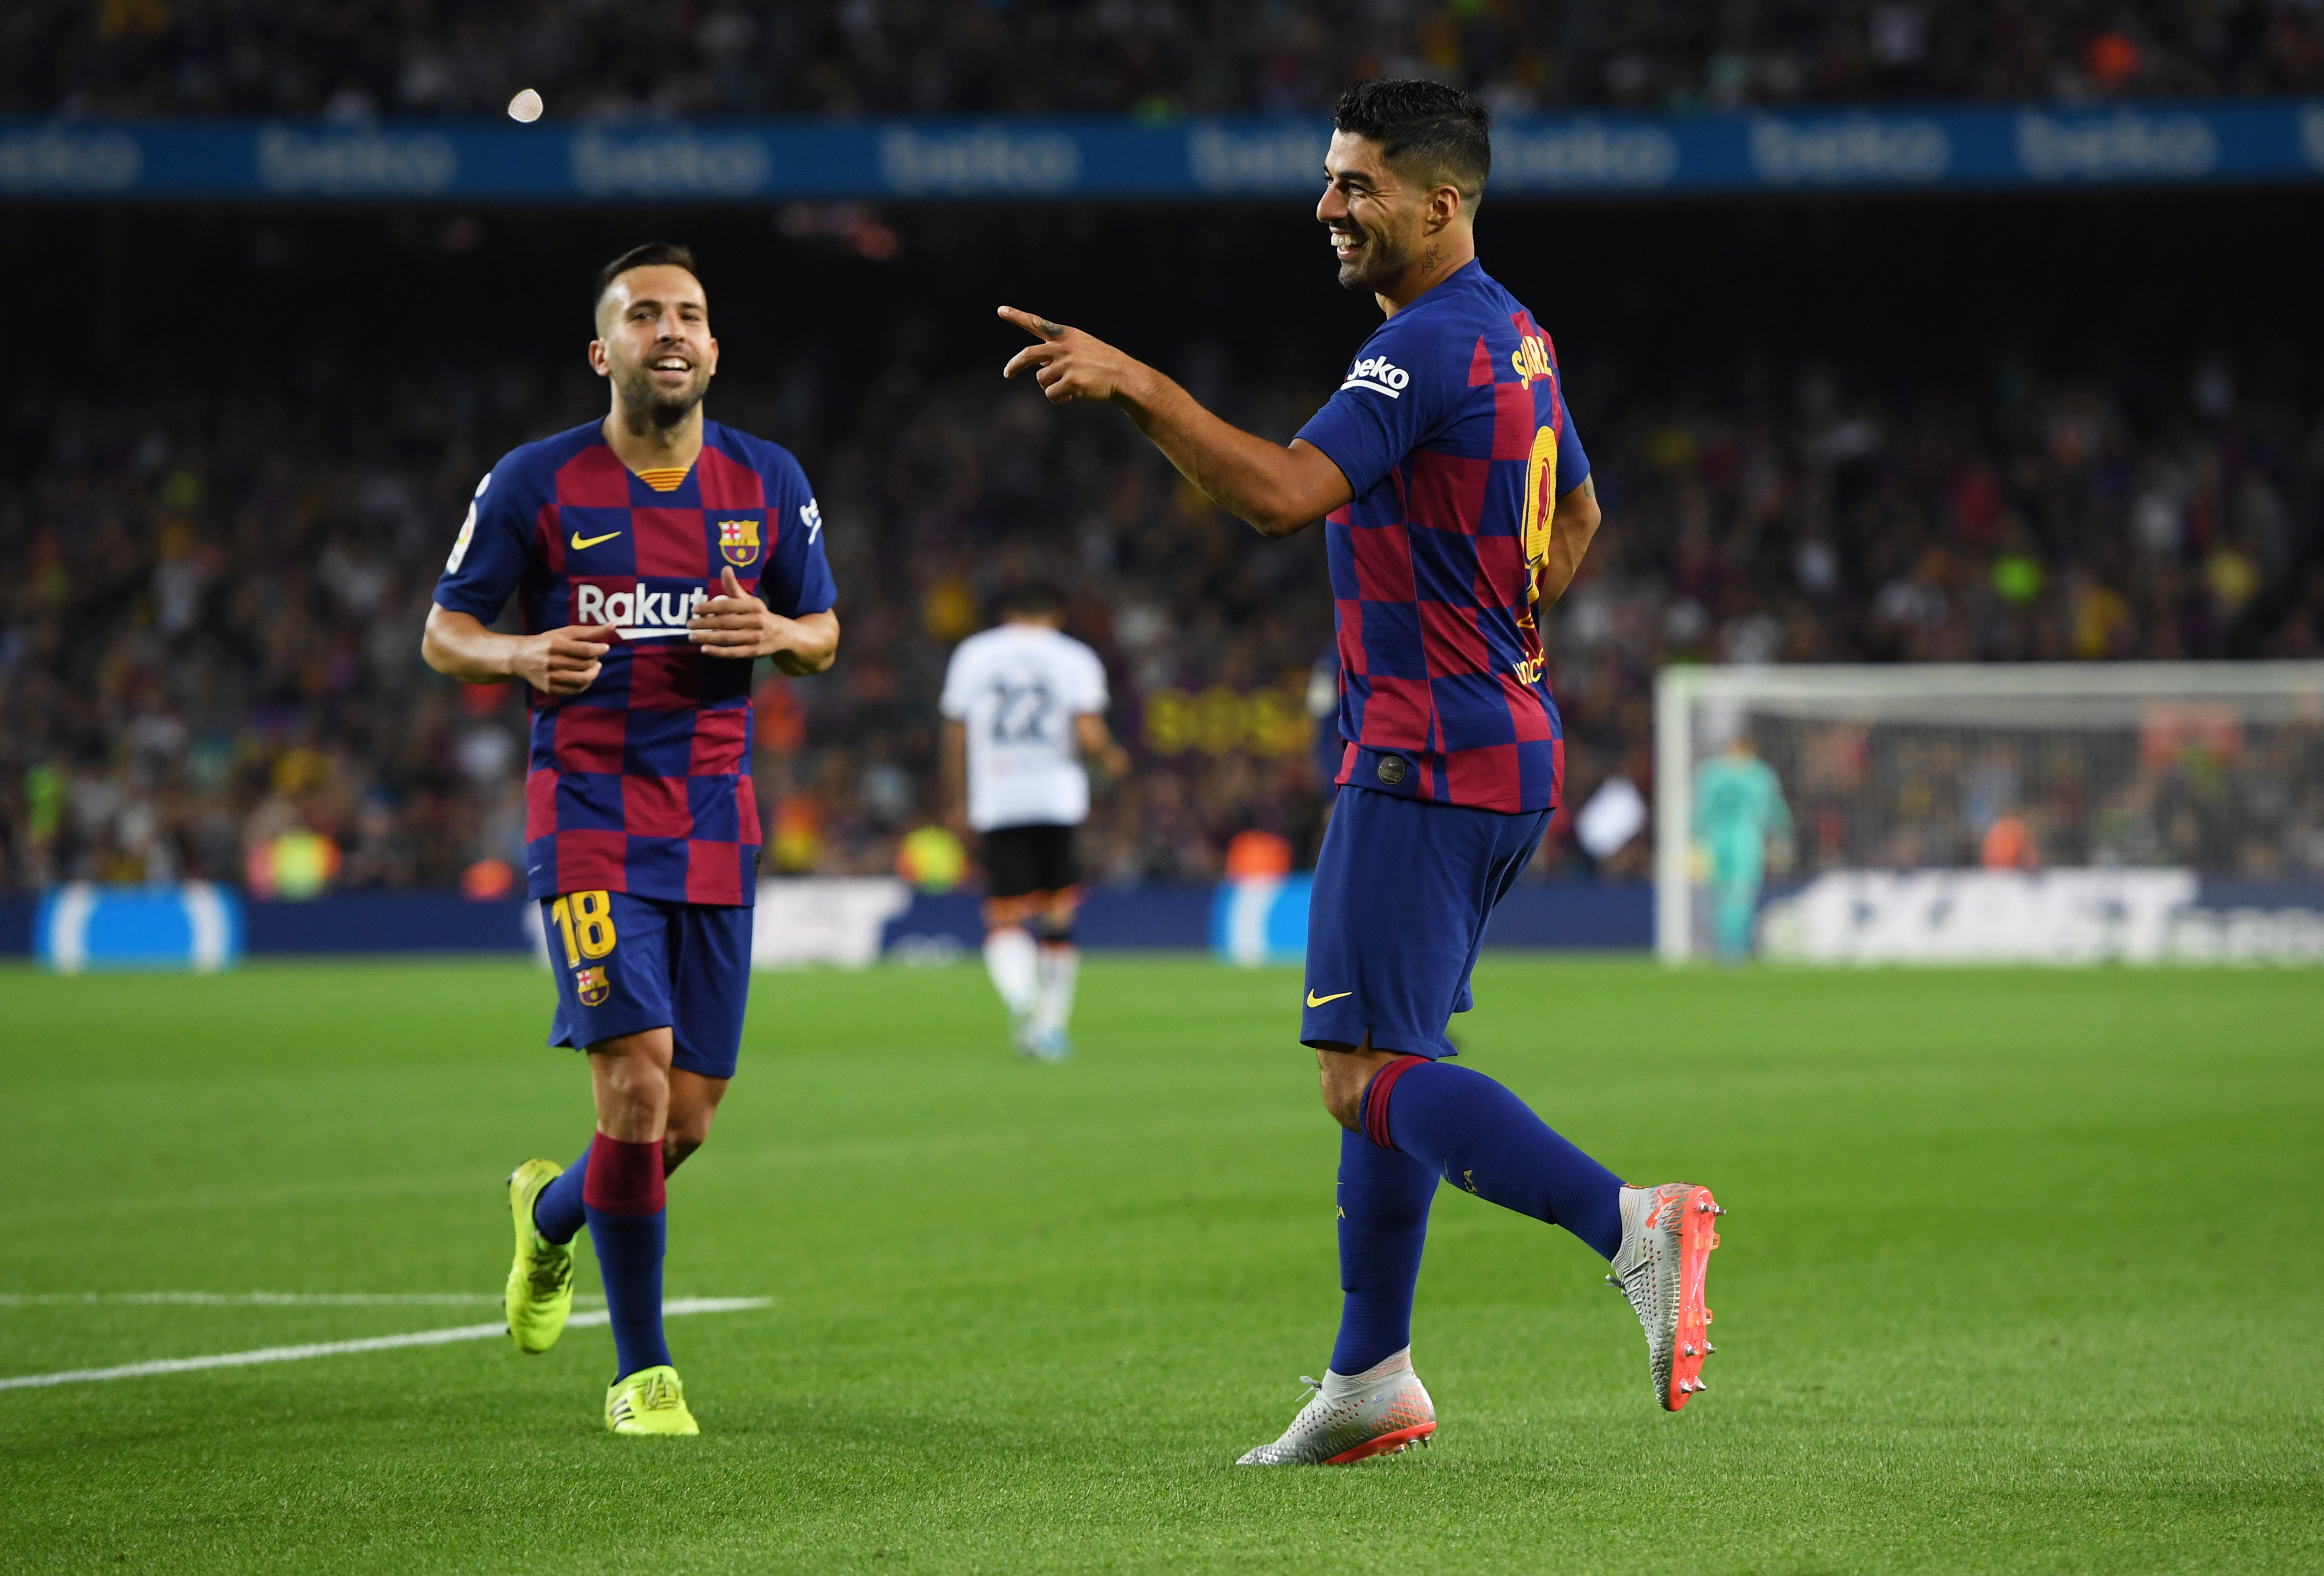 BARCELONA, SPAIN - SEPTEMBER 14:  Luis Suarez of FC Barcelona celebrates as he scores his team's fifth goal with Jordi Alba during the Liga match between FC Barcelona and Valencia CF at Camp Nou on September 14, 2019 in Barcelona, Spain. (Photo by Alex Caparros/Getty Images)